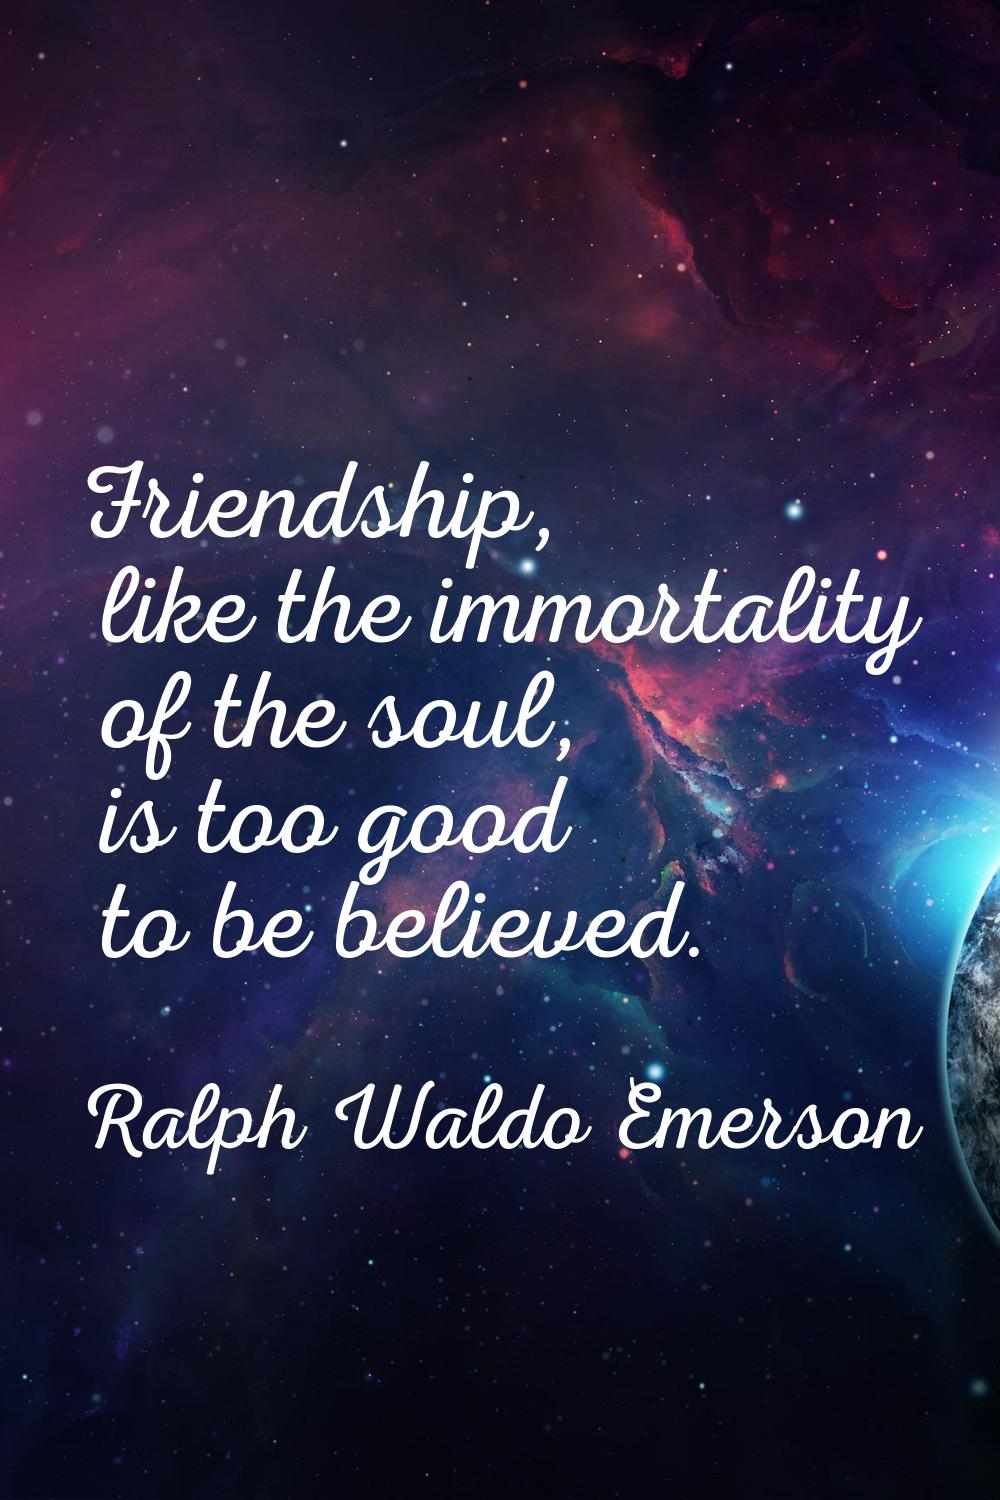 Friendship, like the immortality of the soul, is too good to be believed.